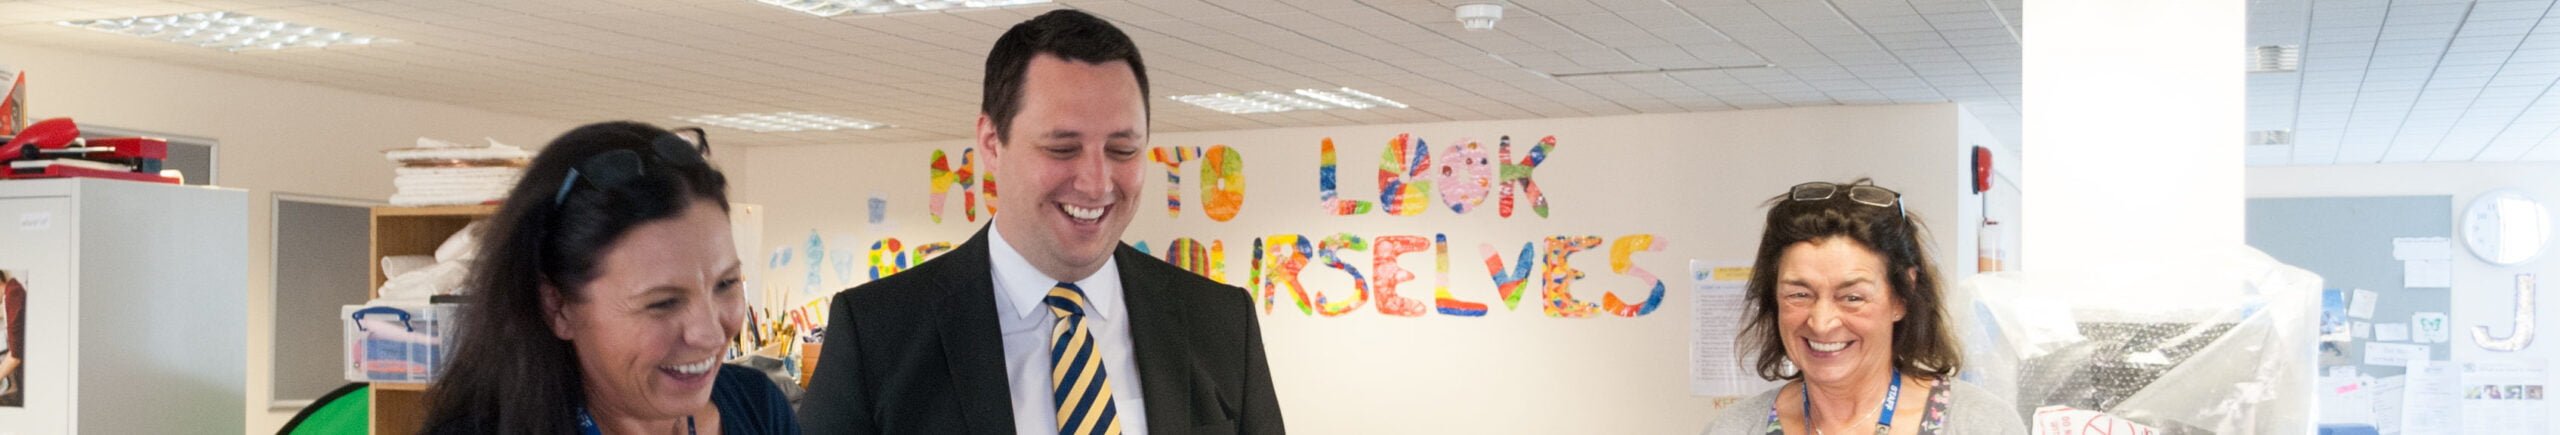 Tees Valley Mayor Ben Houchen at Vision25 | Tees Valley Combined Authority